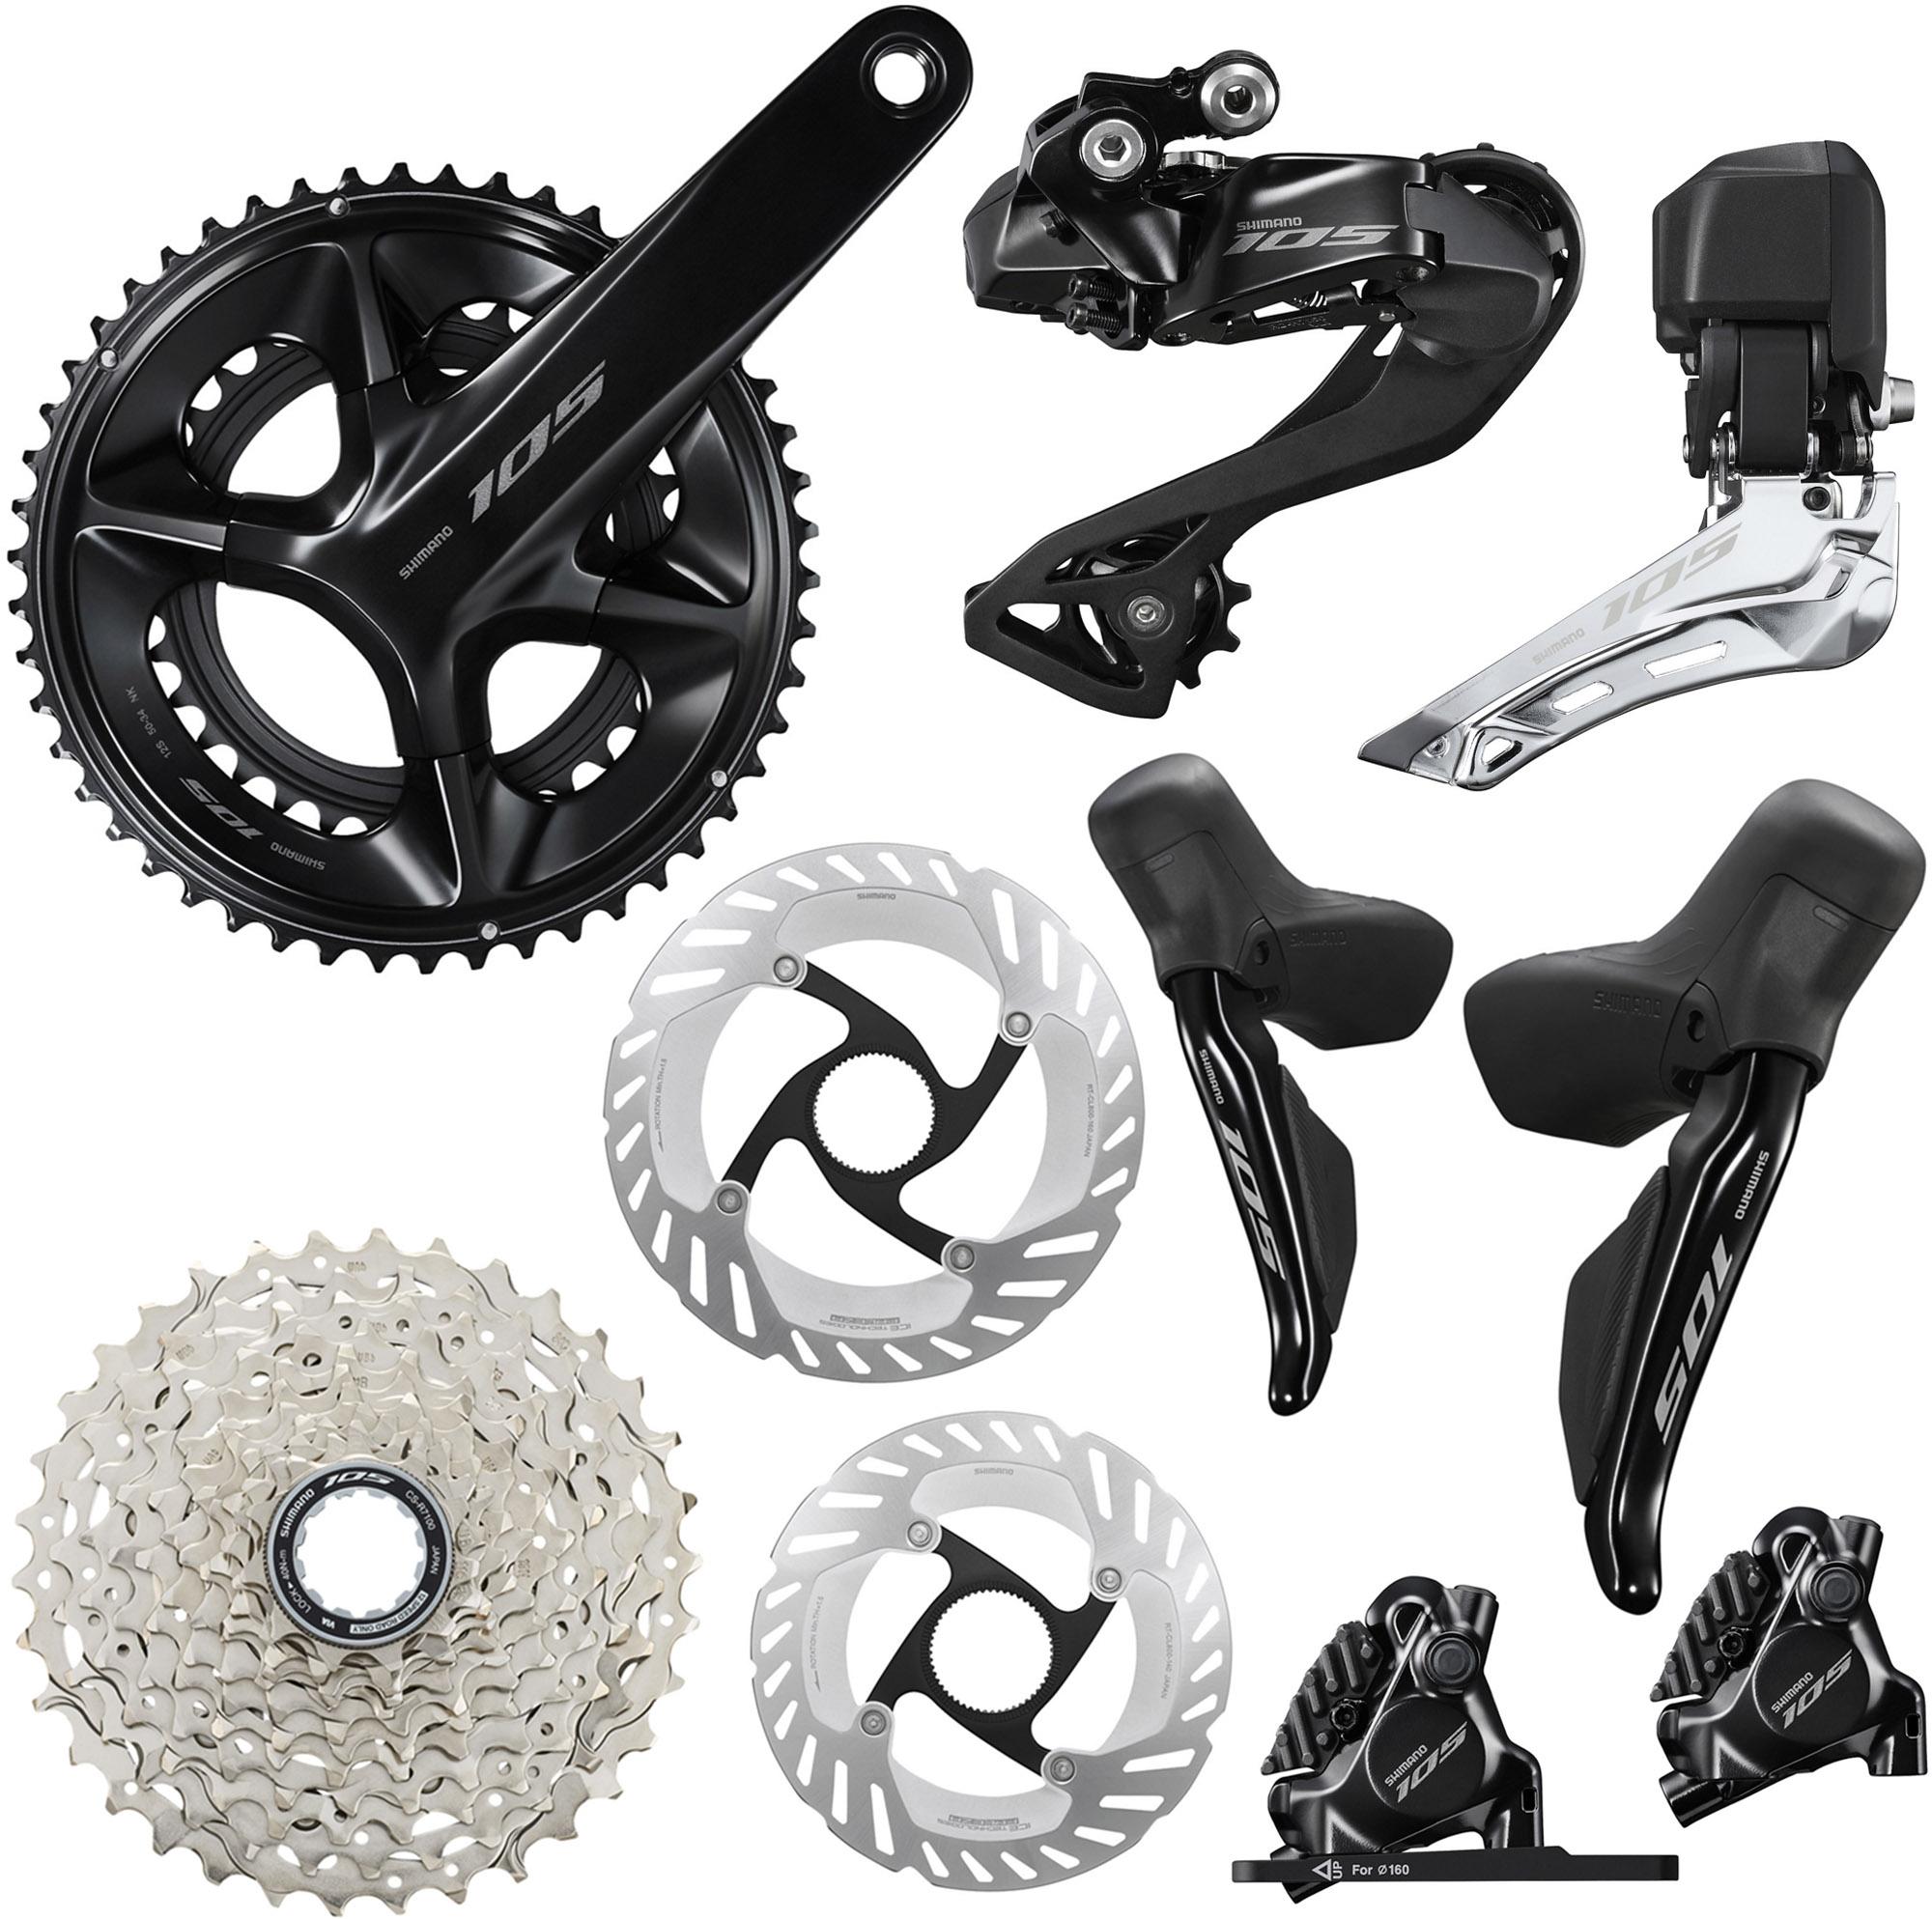 Shimano 105 R7100 Di2 Complete Disc Groupset - Grey